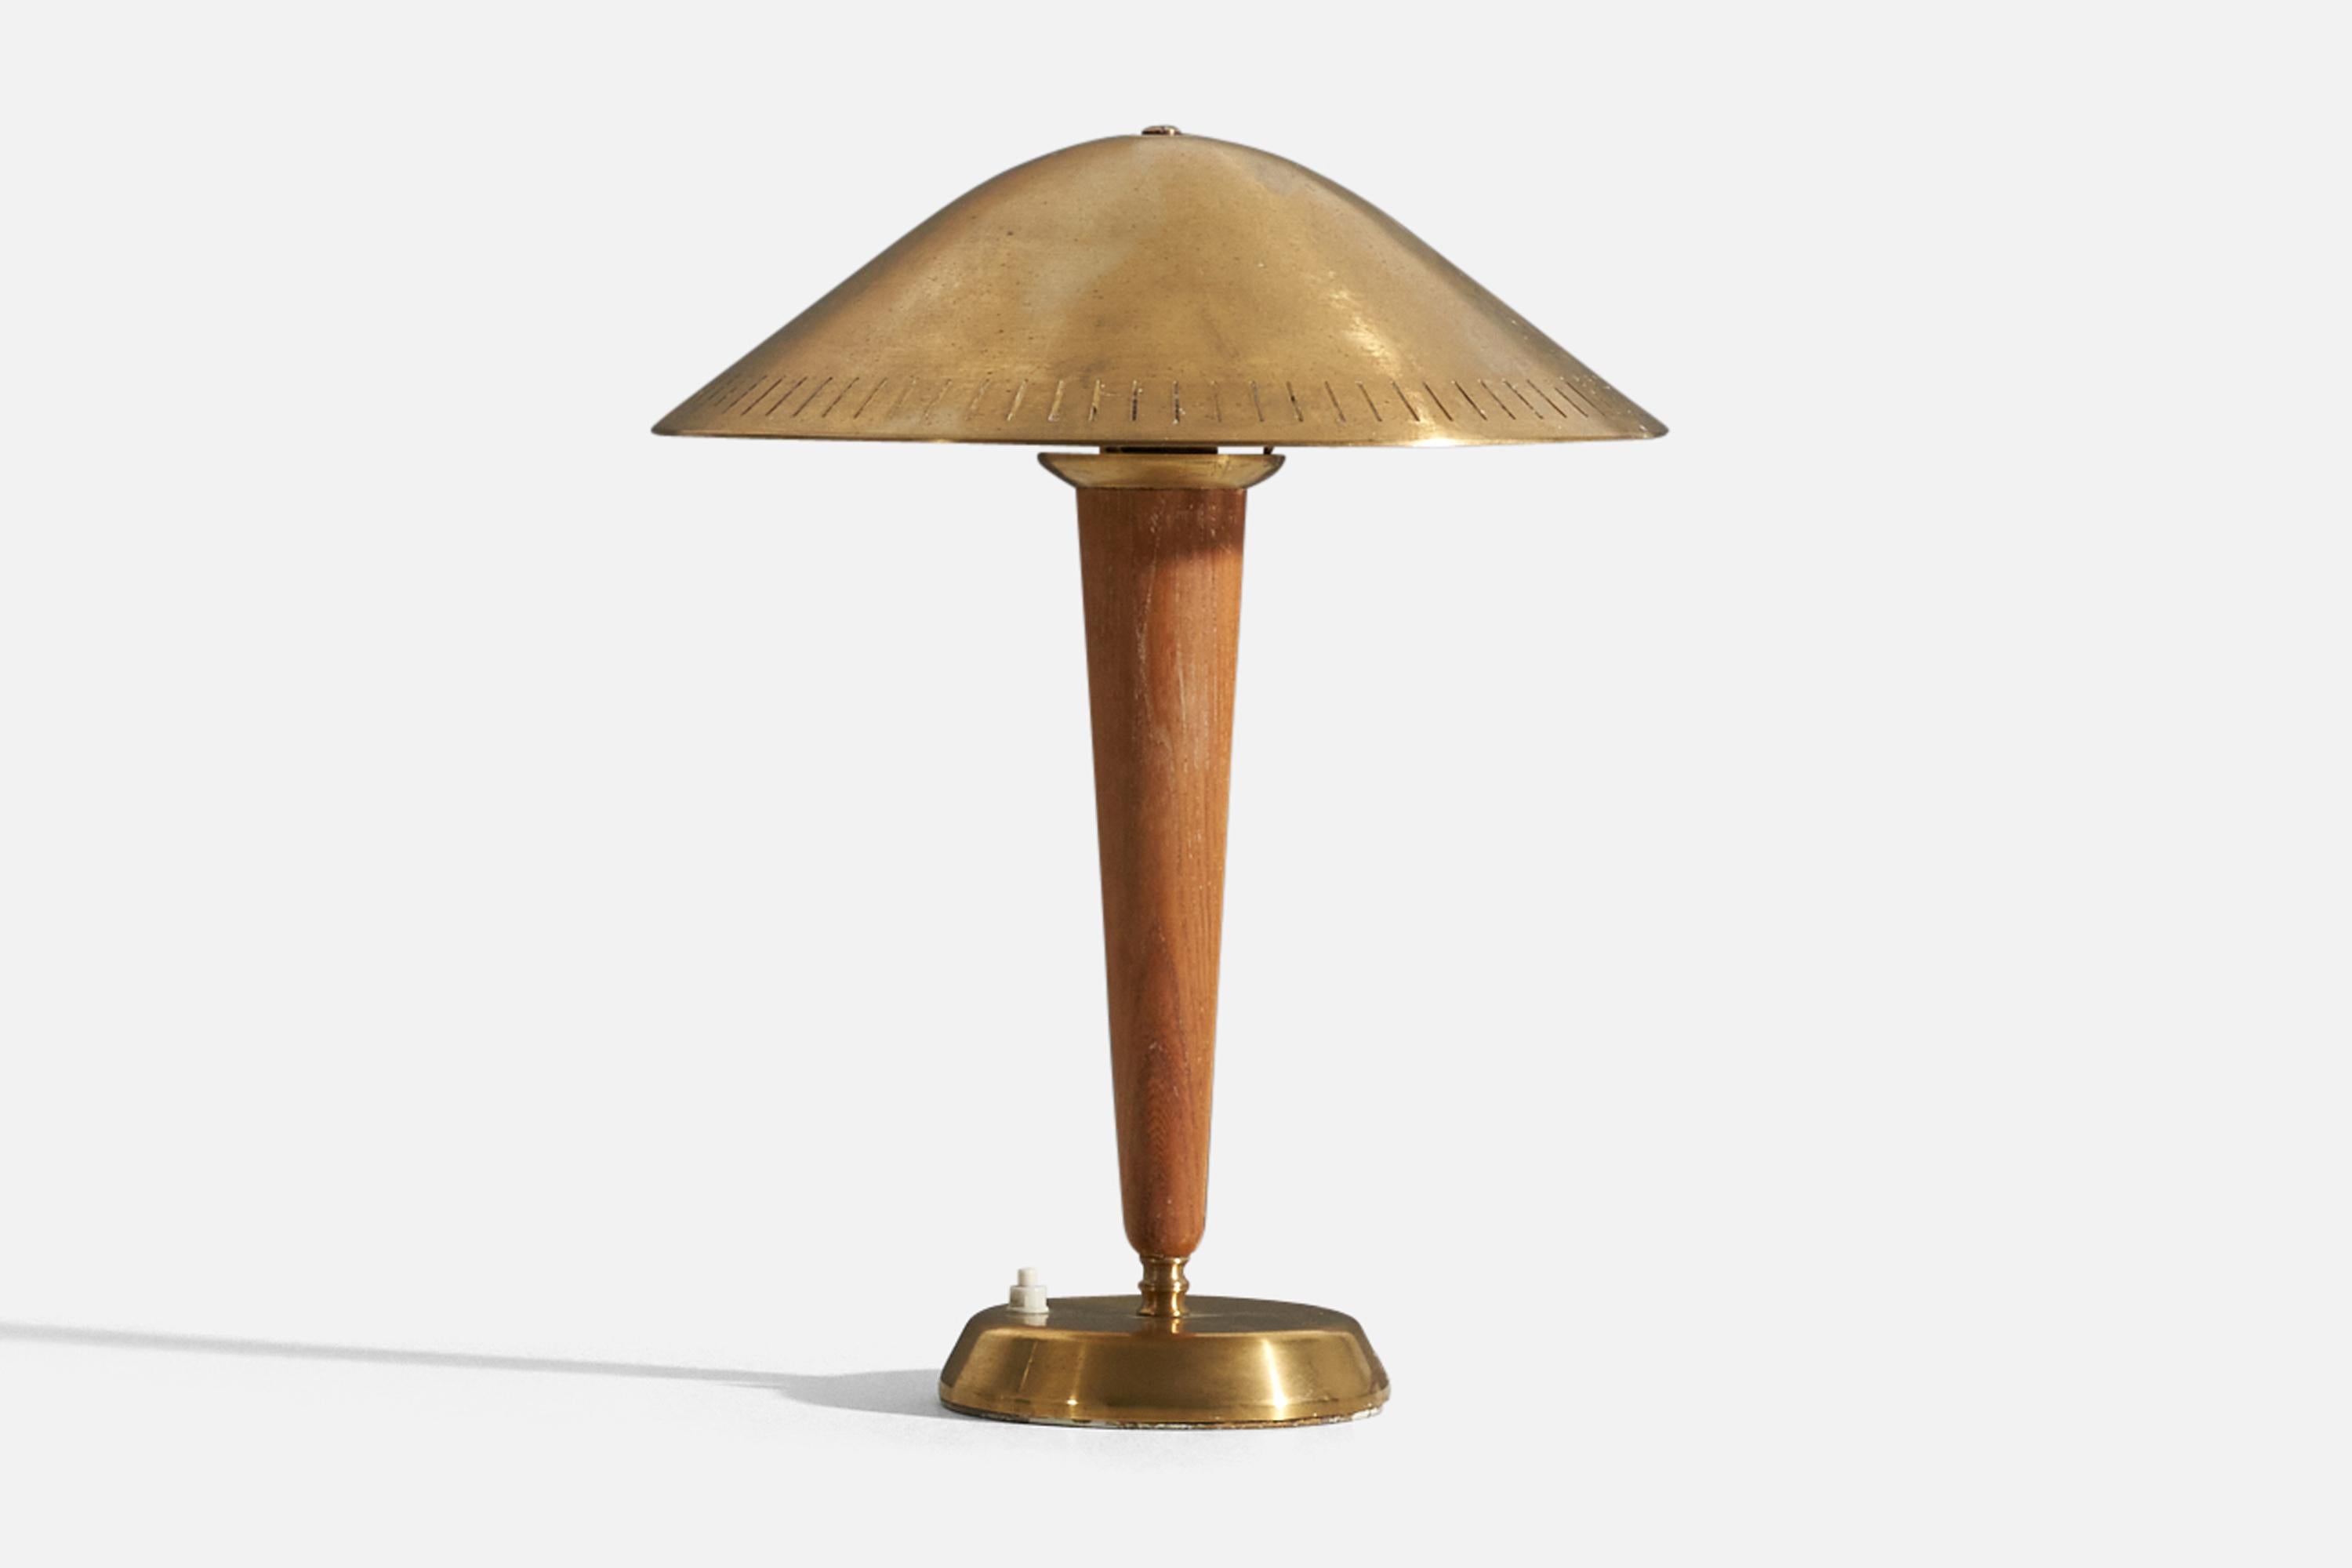 A modernist desk light / table lamp. Designed and produced by ASEA, Sweden, 1940s.

Other designers of the period include Harald Notini, Carl-Axel Acking, Paavo Tynell, and Alvar Aalto.